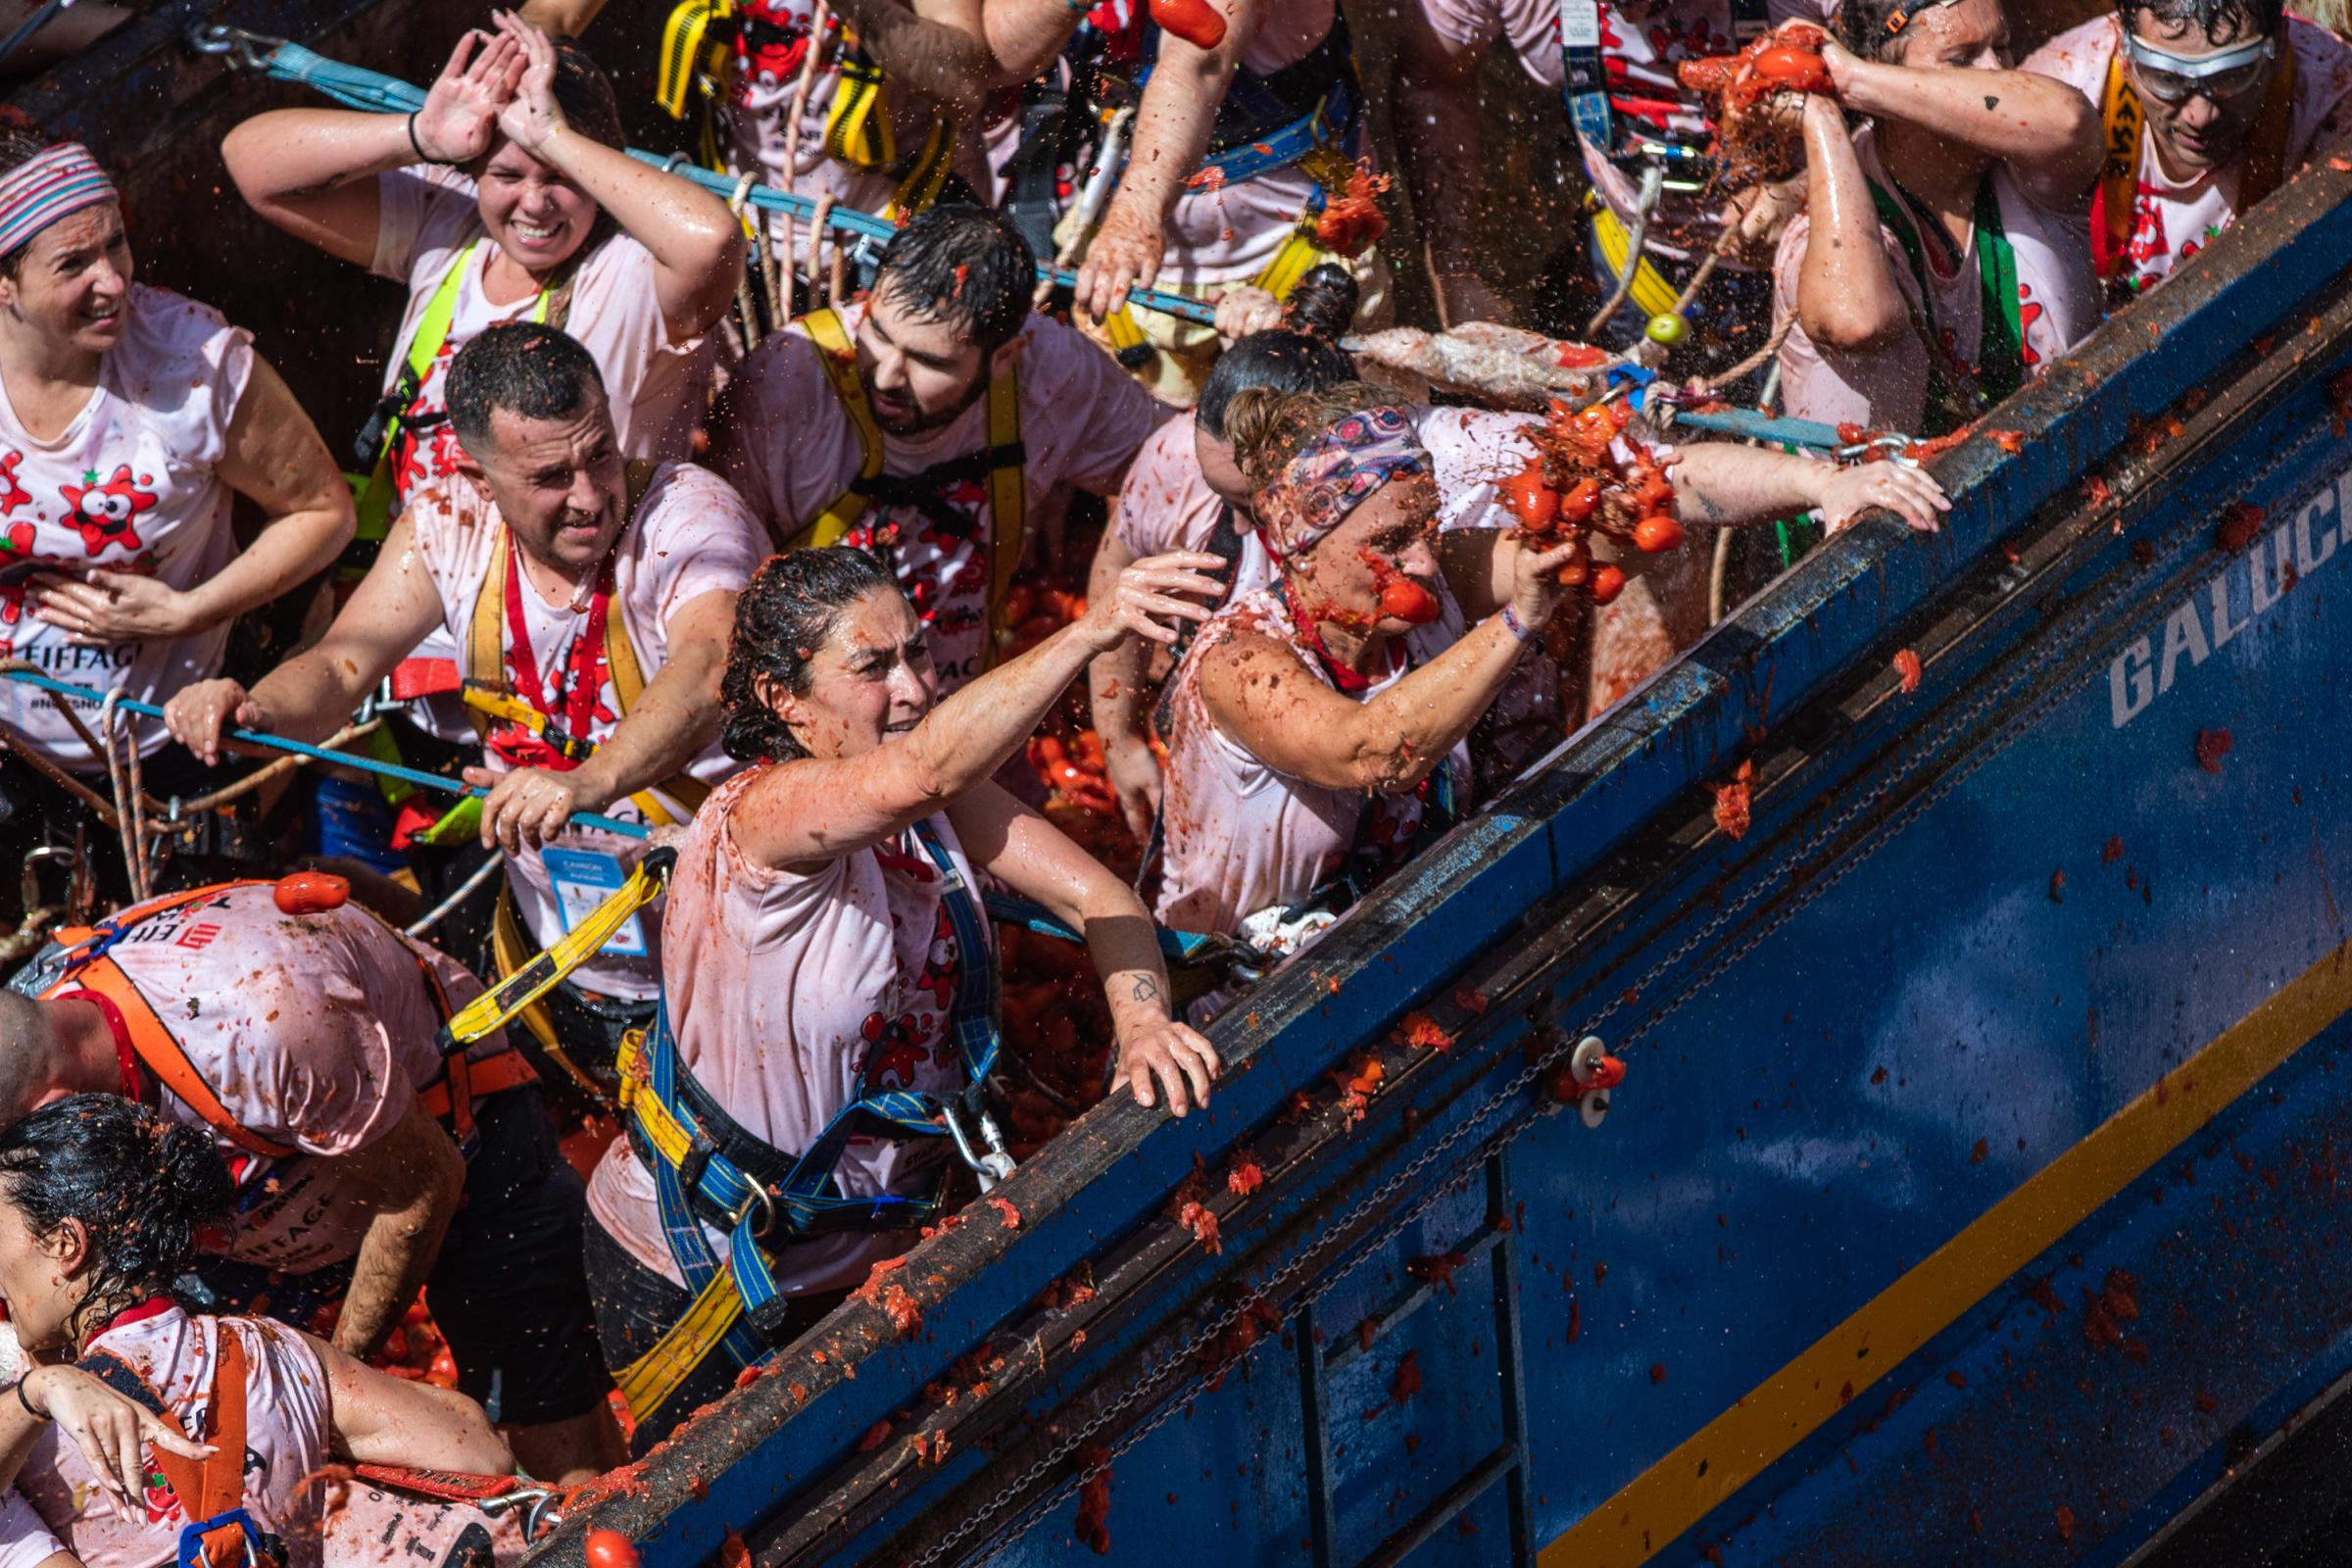 Spain's Tomato Throwing Festival Returns After Covid Hiatus For The 75th Edition - BUNOL, SPAIN - AUGUST 31: One of the trucks full of...